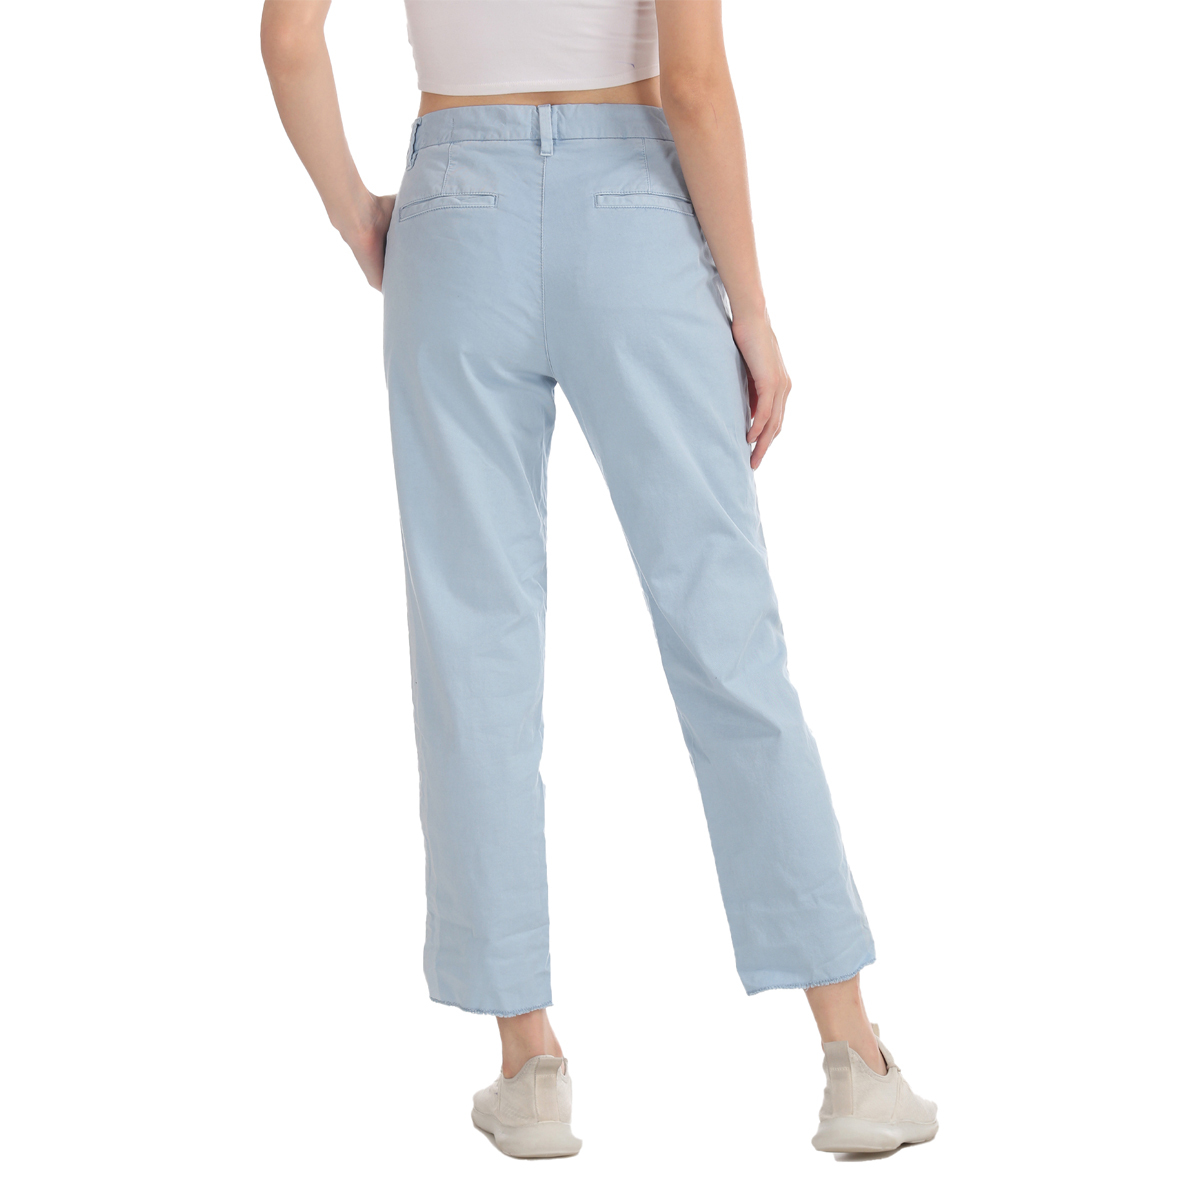 Gap Mid Rise Girlfriend Fit Solid Color Trouser Styled with Raw Hem & Faded Side Seam Line - Blue, Size-2